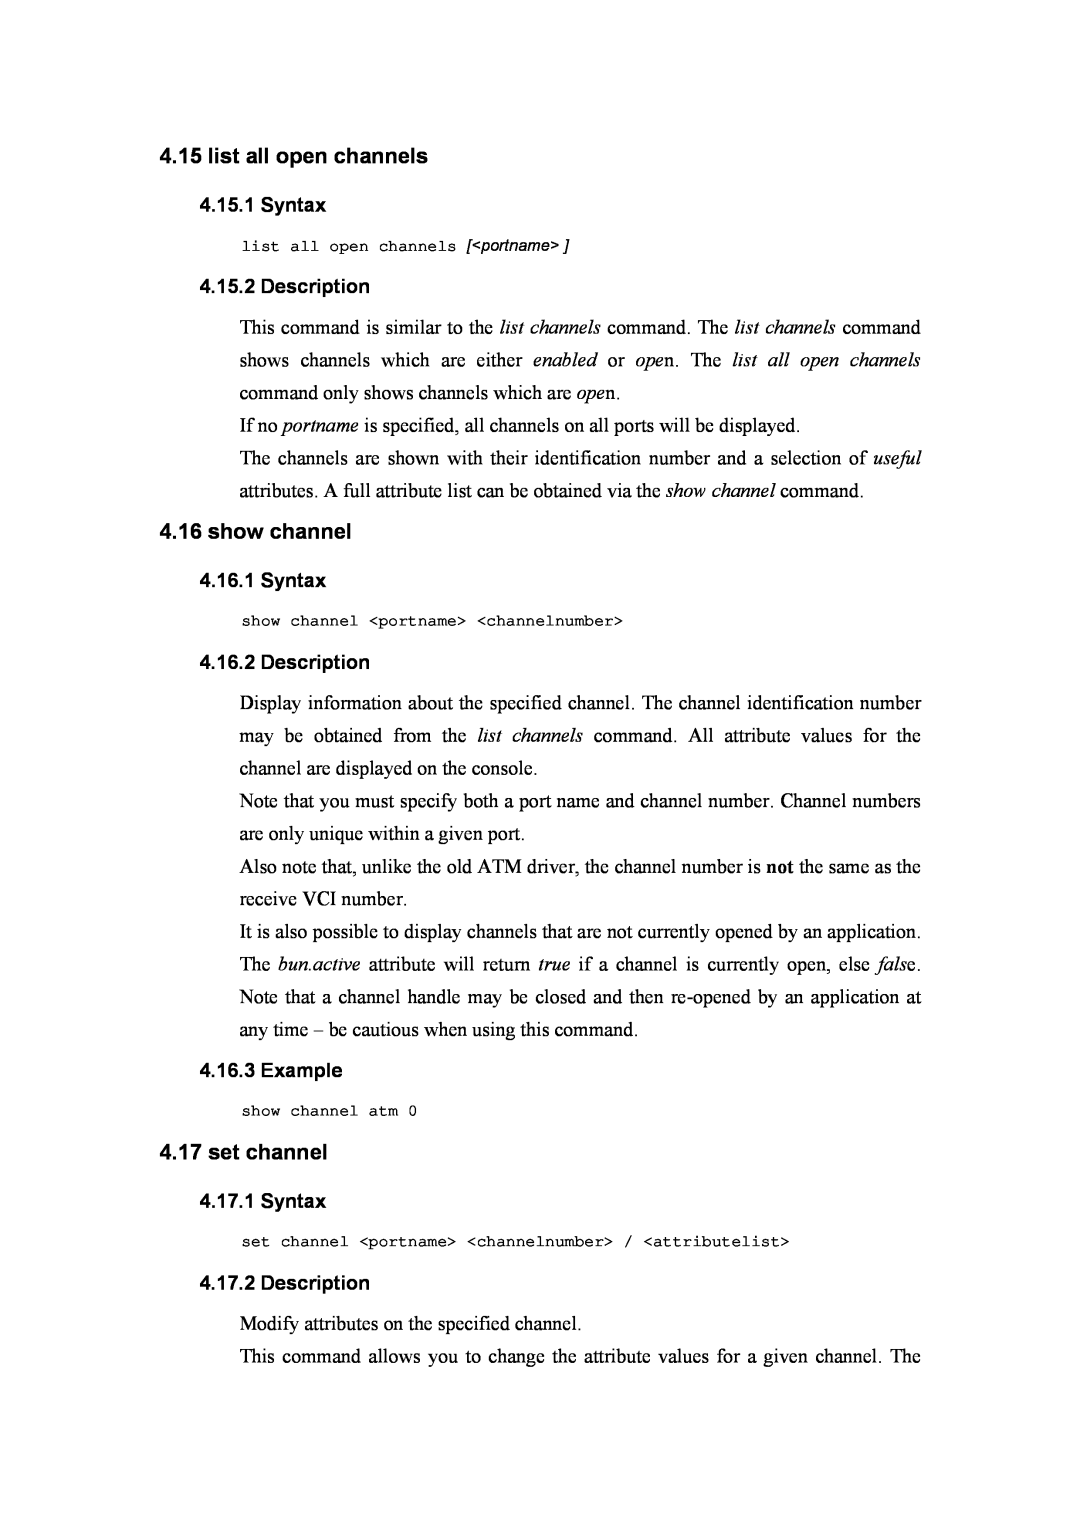 Atlantis Land A02-RA(Atmos)_ME01 manual list all open channels, show channel, set channel, Syntax, Description, Example 